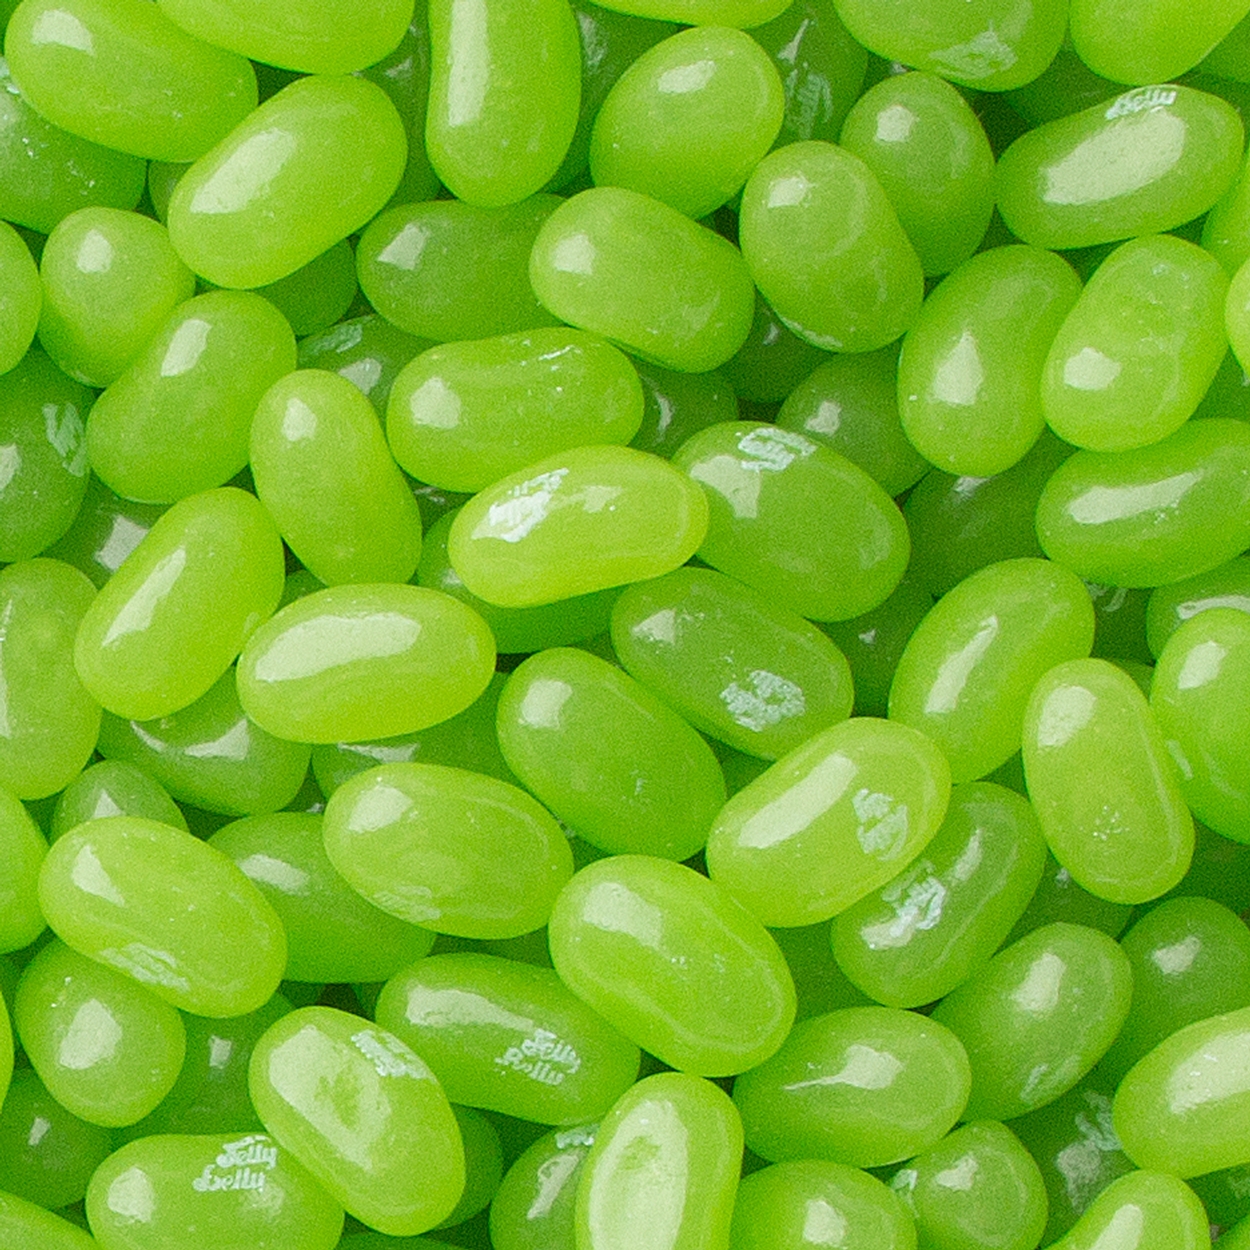 Green jelly. Candy Lime. Green Jelly Bean. Jelly belly Green. Zozole Painter Green Jelly.